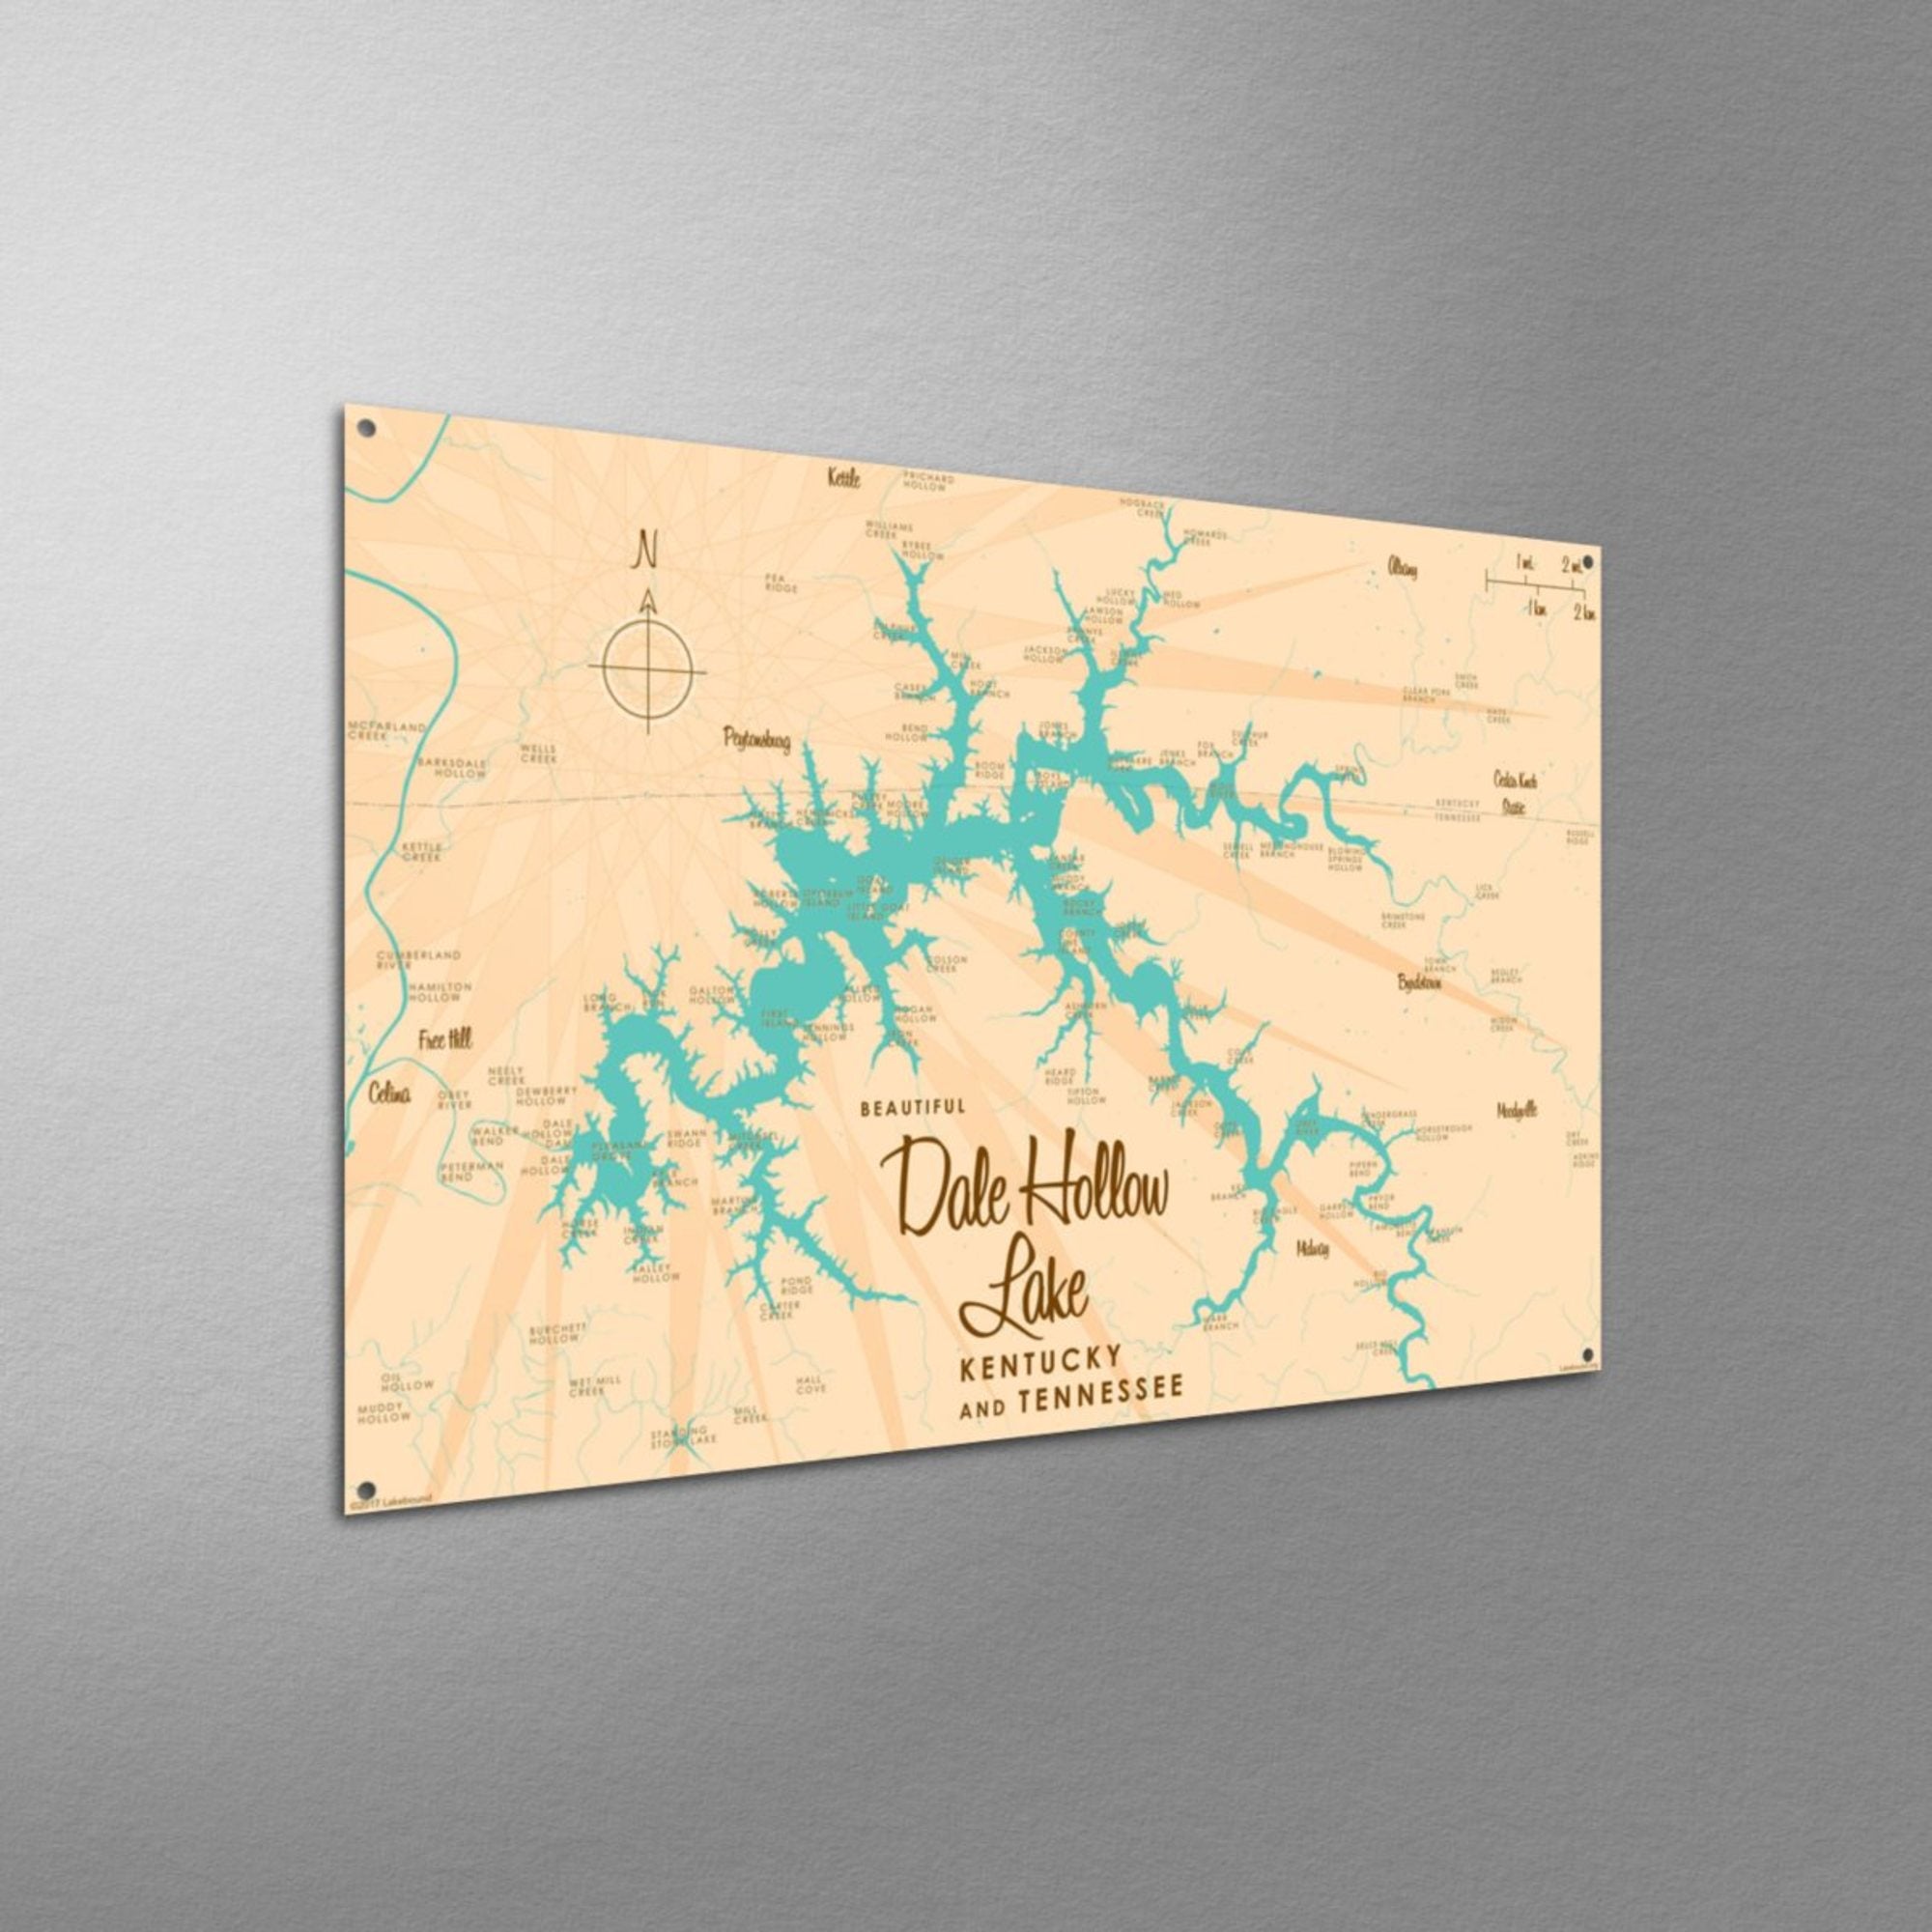 Dale Hollow Lake Kentucky Tennessee, Metal Sign Map Art